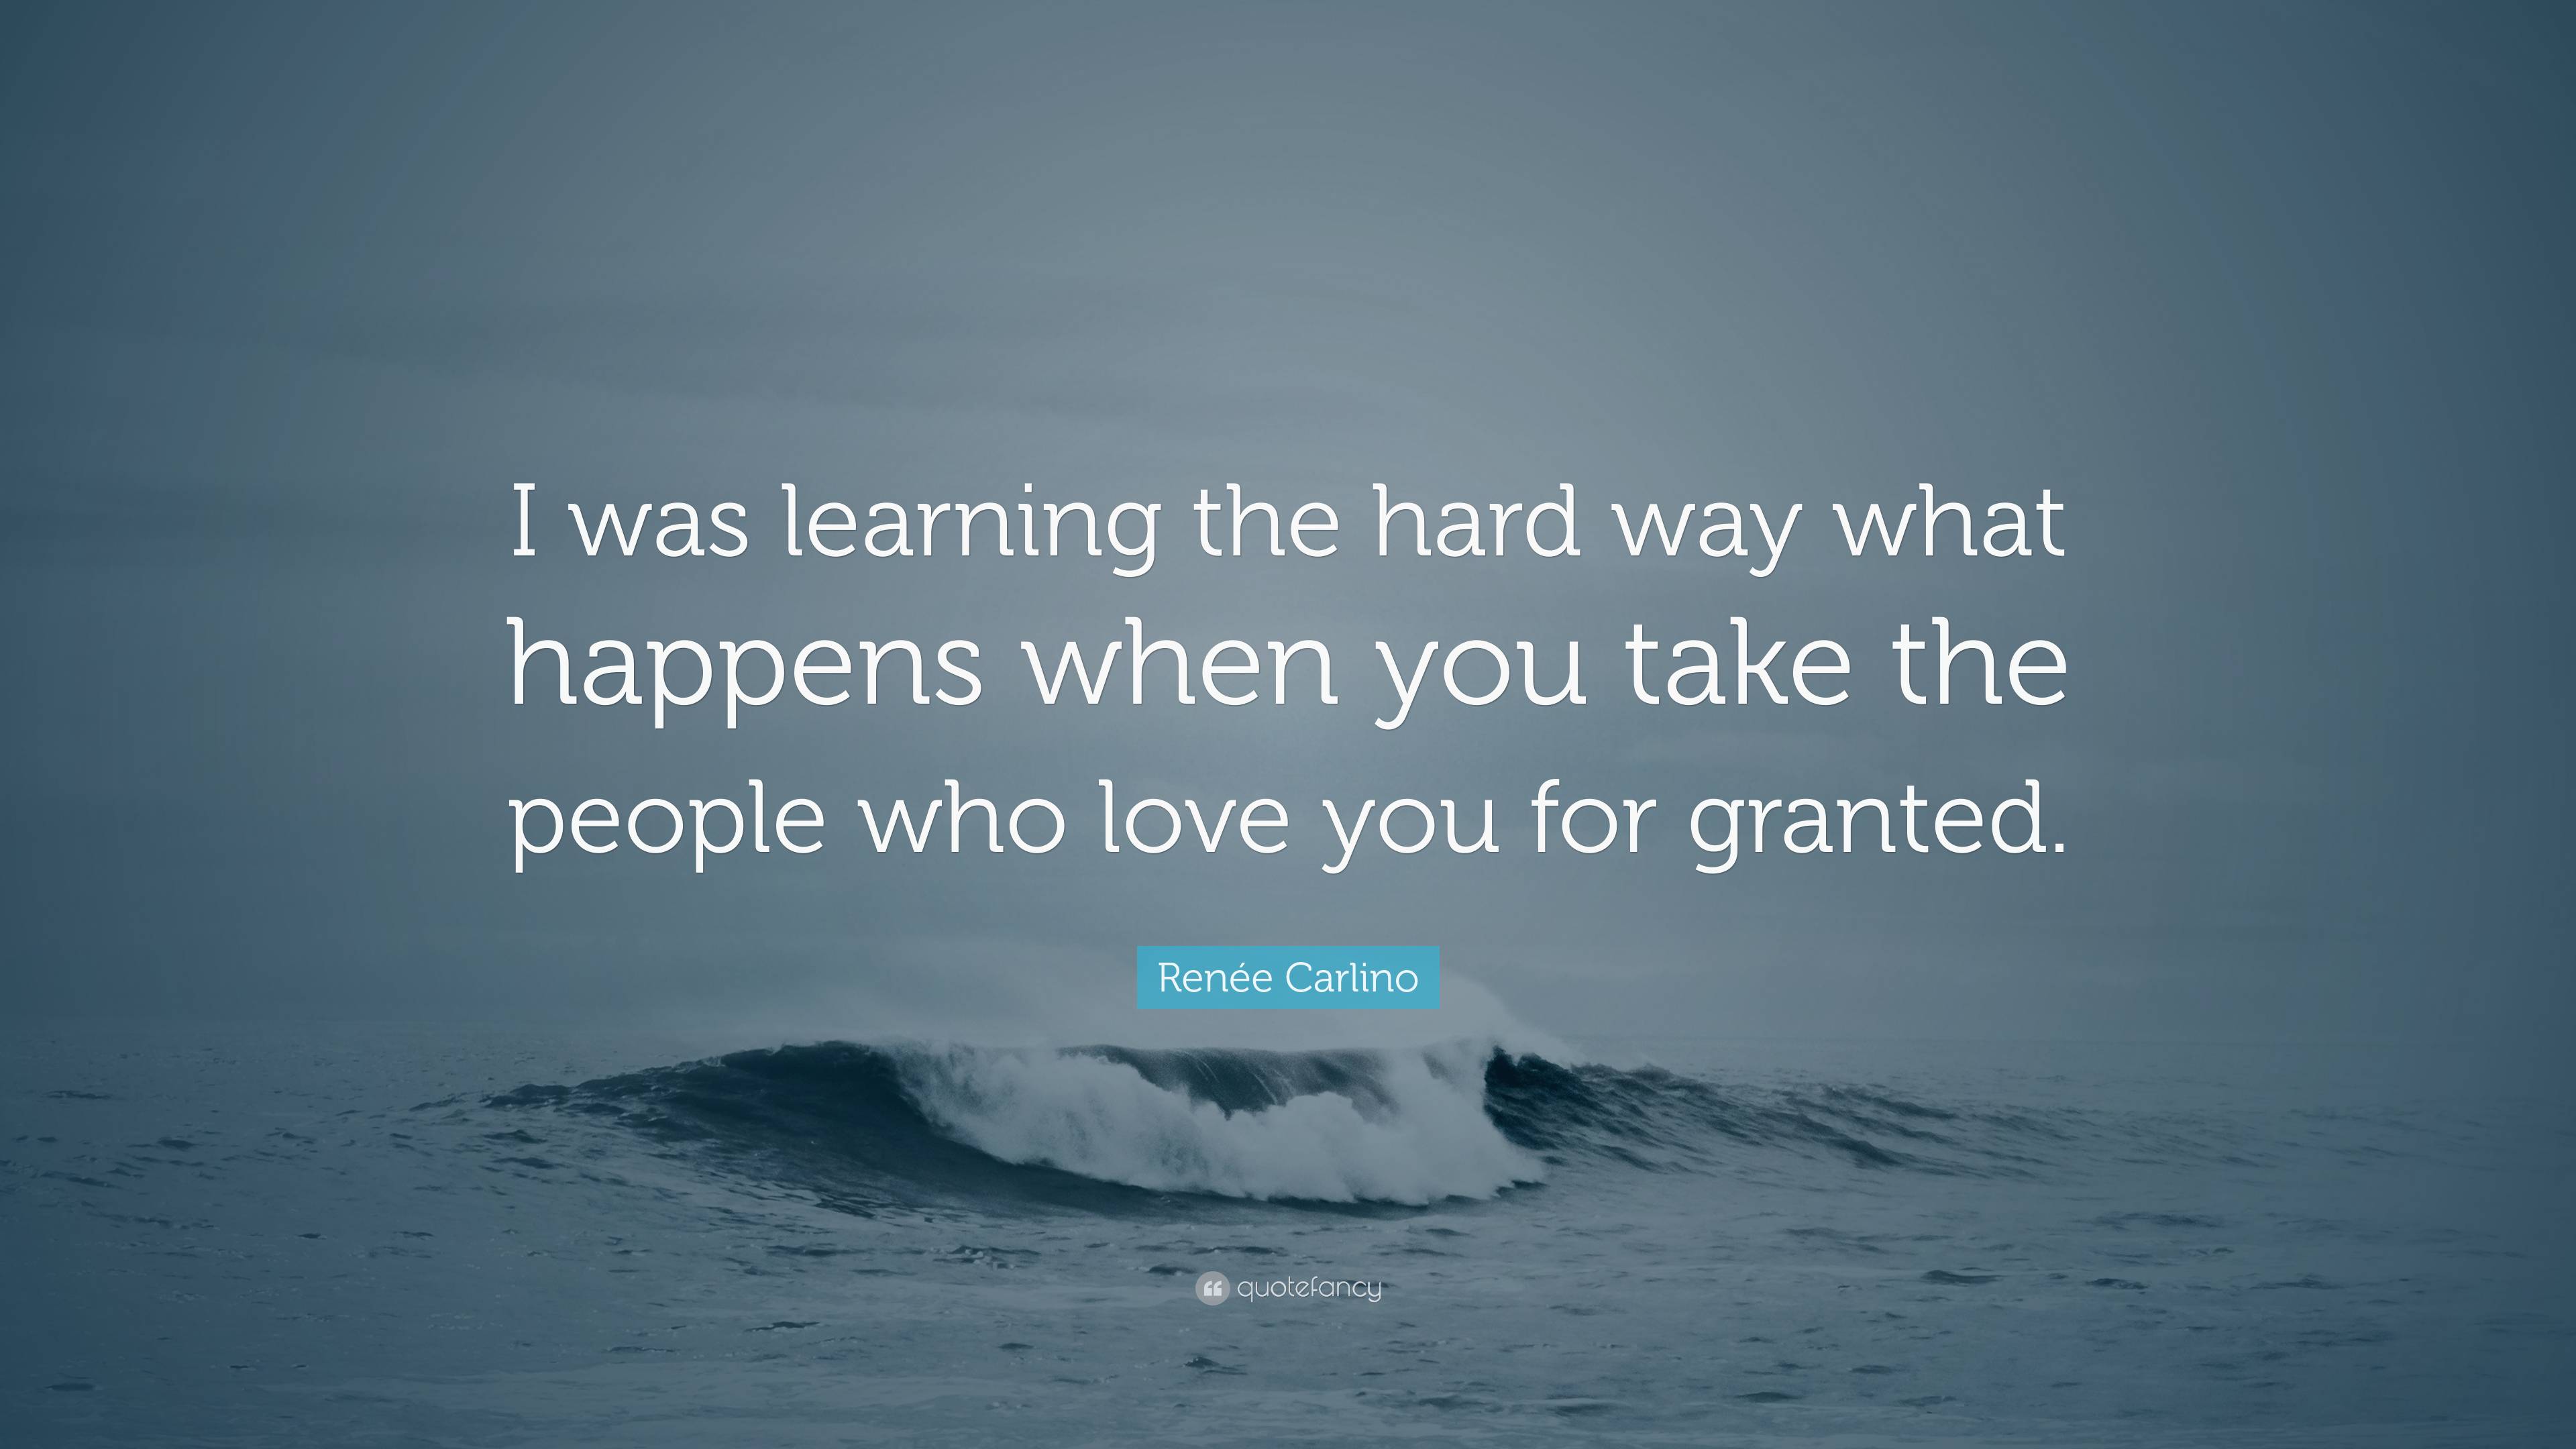 LEARNING THE HARD WAY QUOTES –